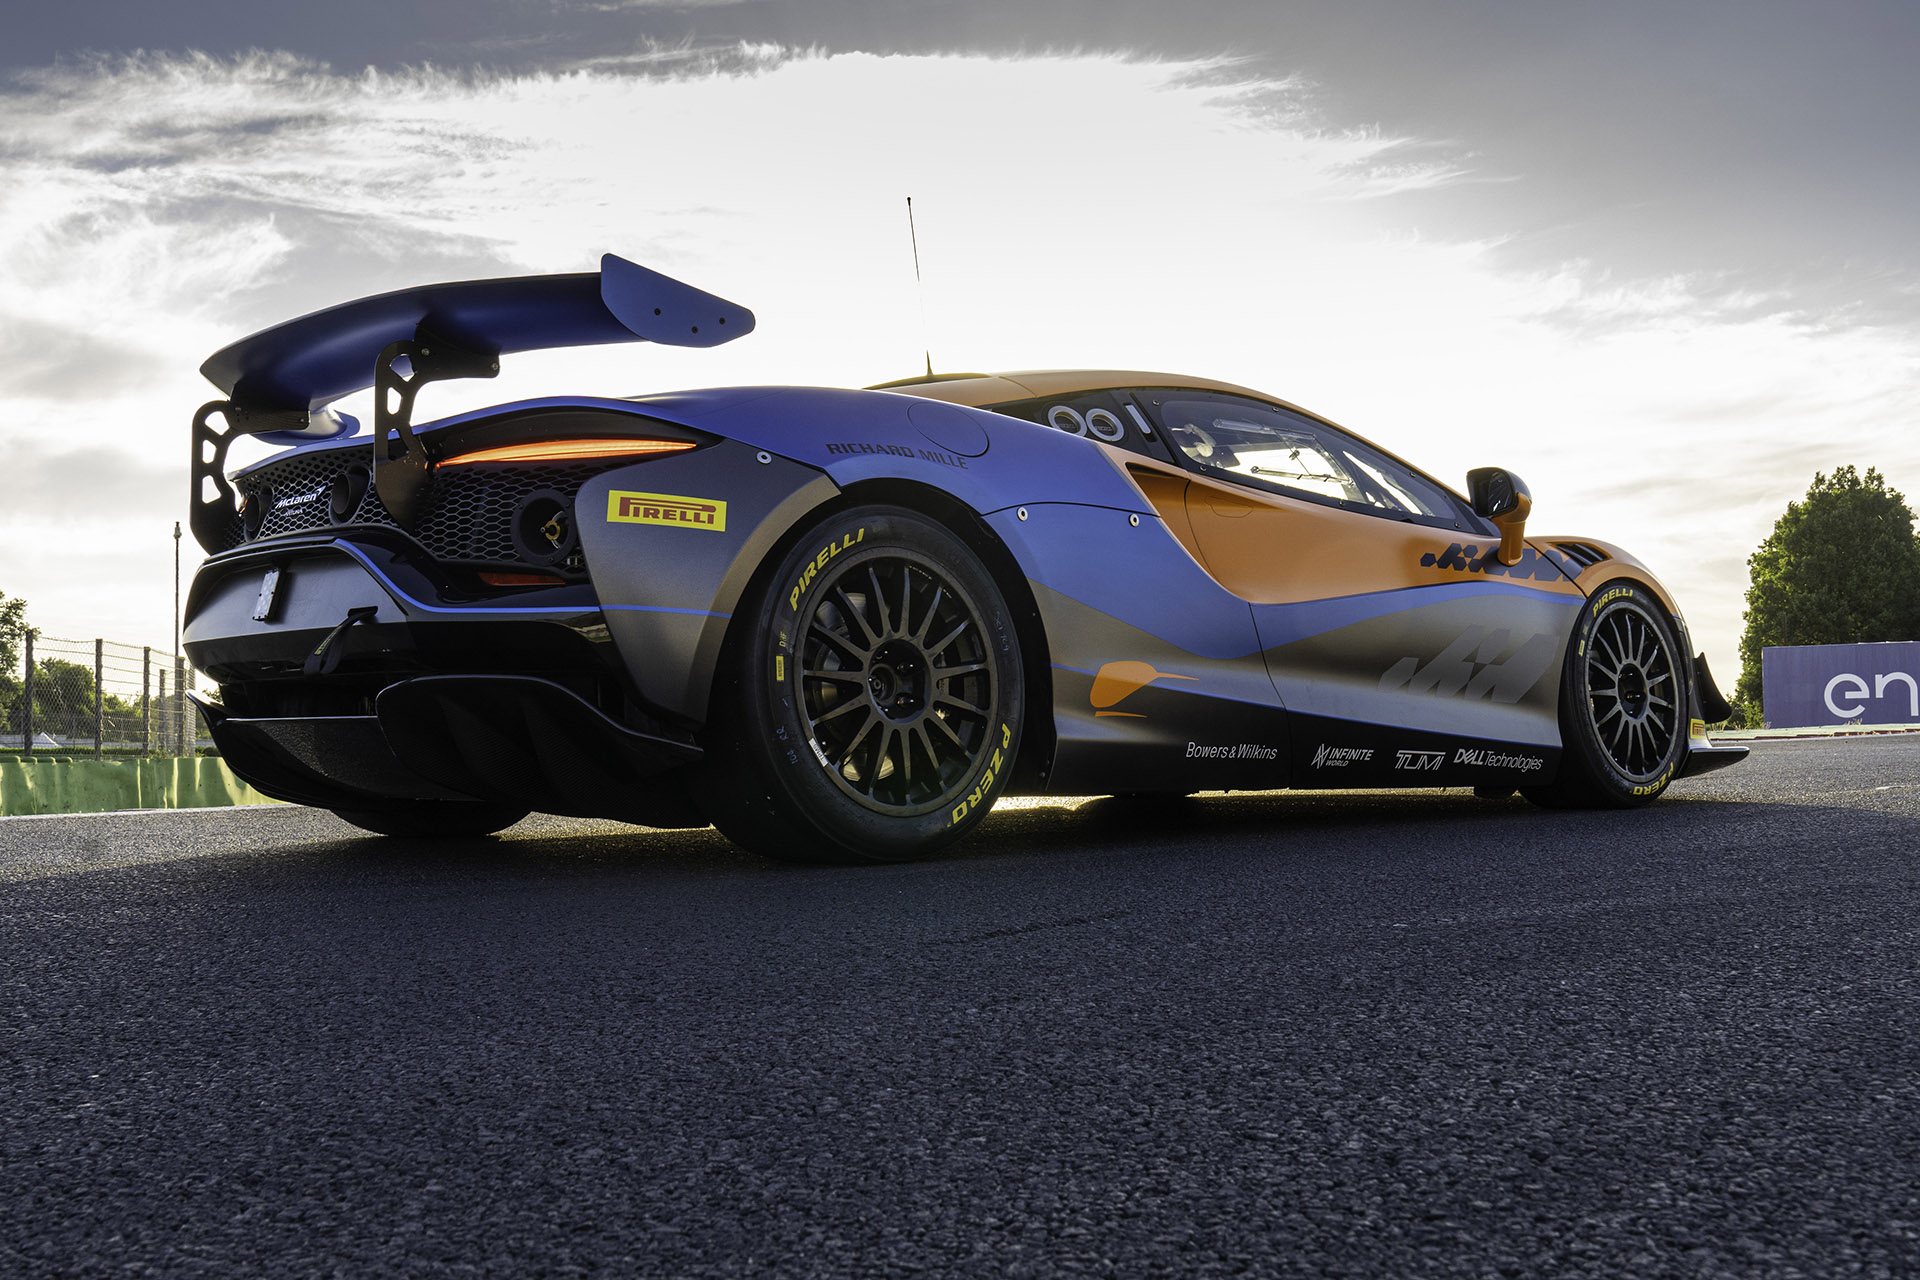 McLaren Artura GT4 Racer debuted without a hybrid road transport system